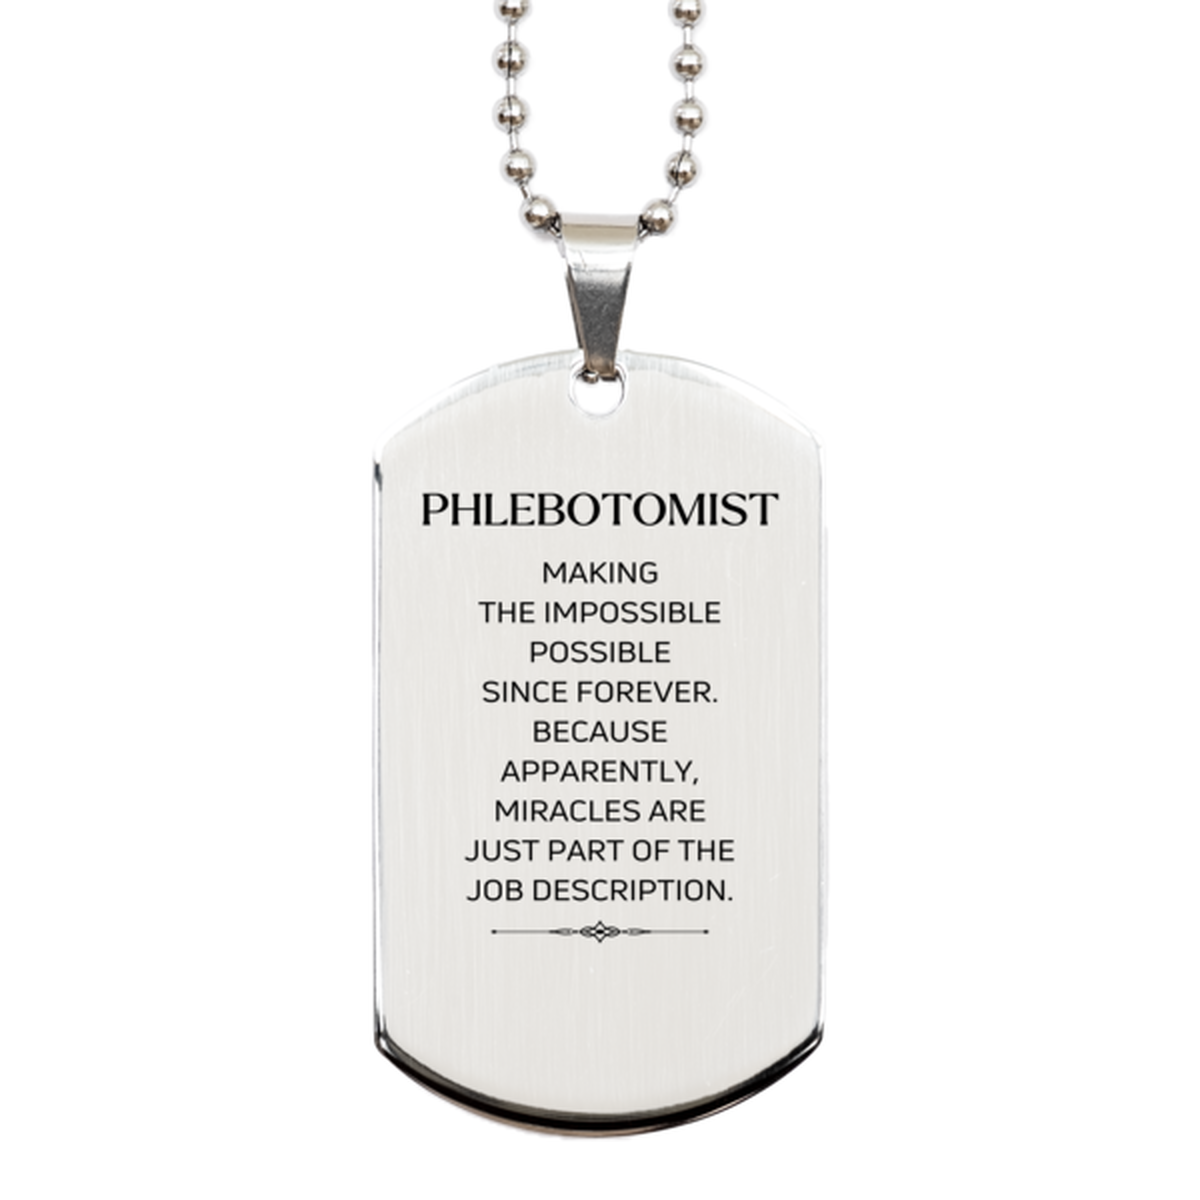 Funny Phlebotomist Gifts, Miracles are just part of the job description, Inspirational Birthday Silver Dog Tag For Phlebotomist, Men, Women, Coworkers, Friends, Boss